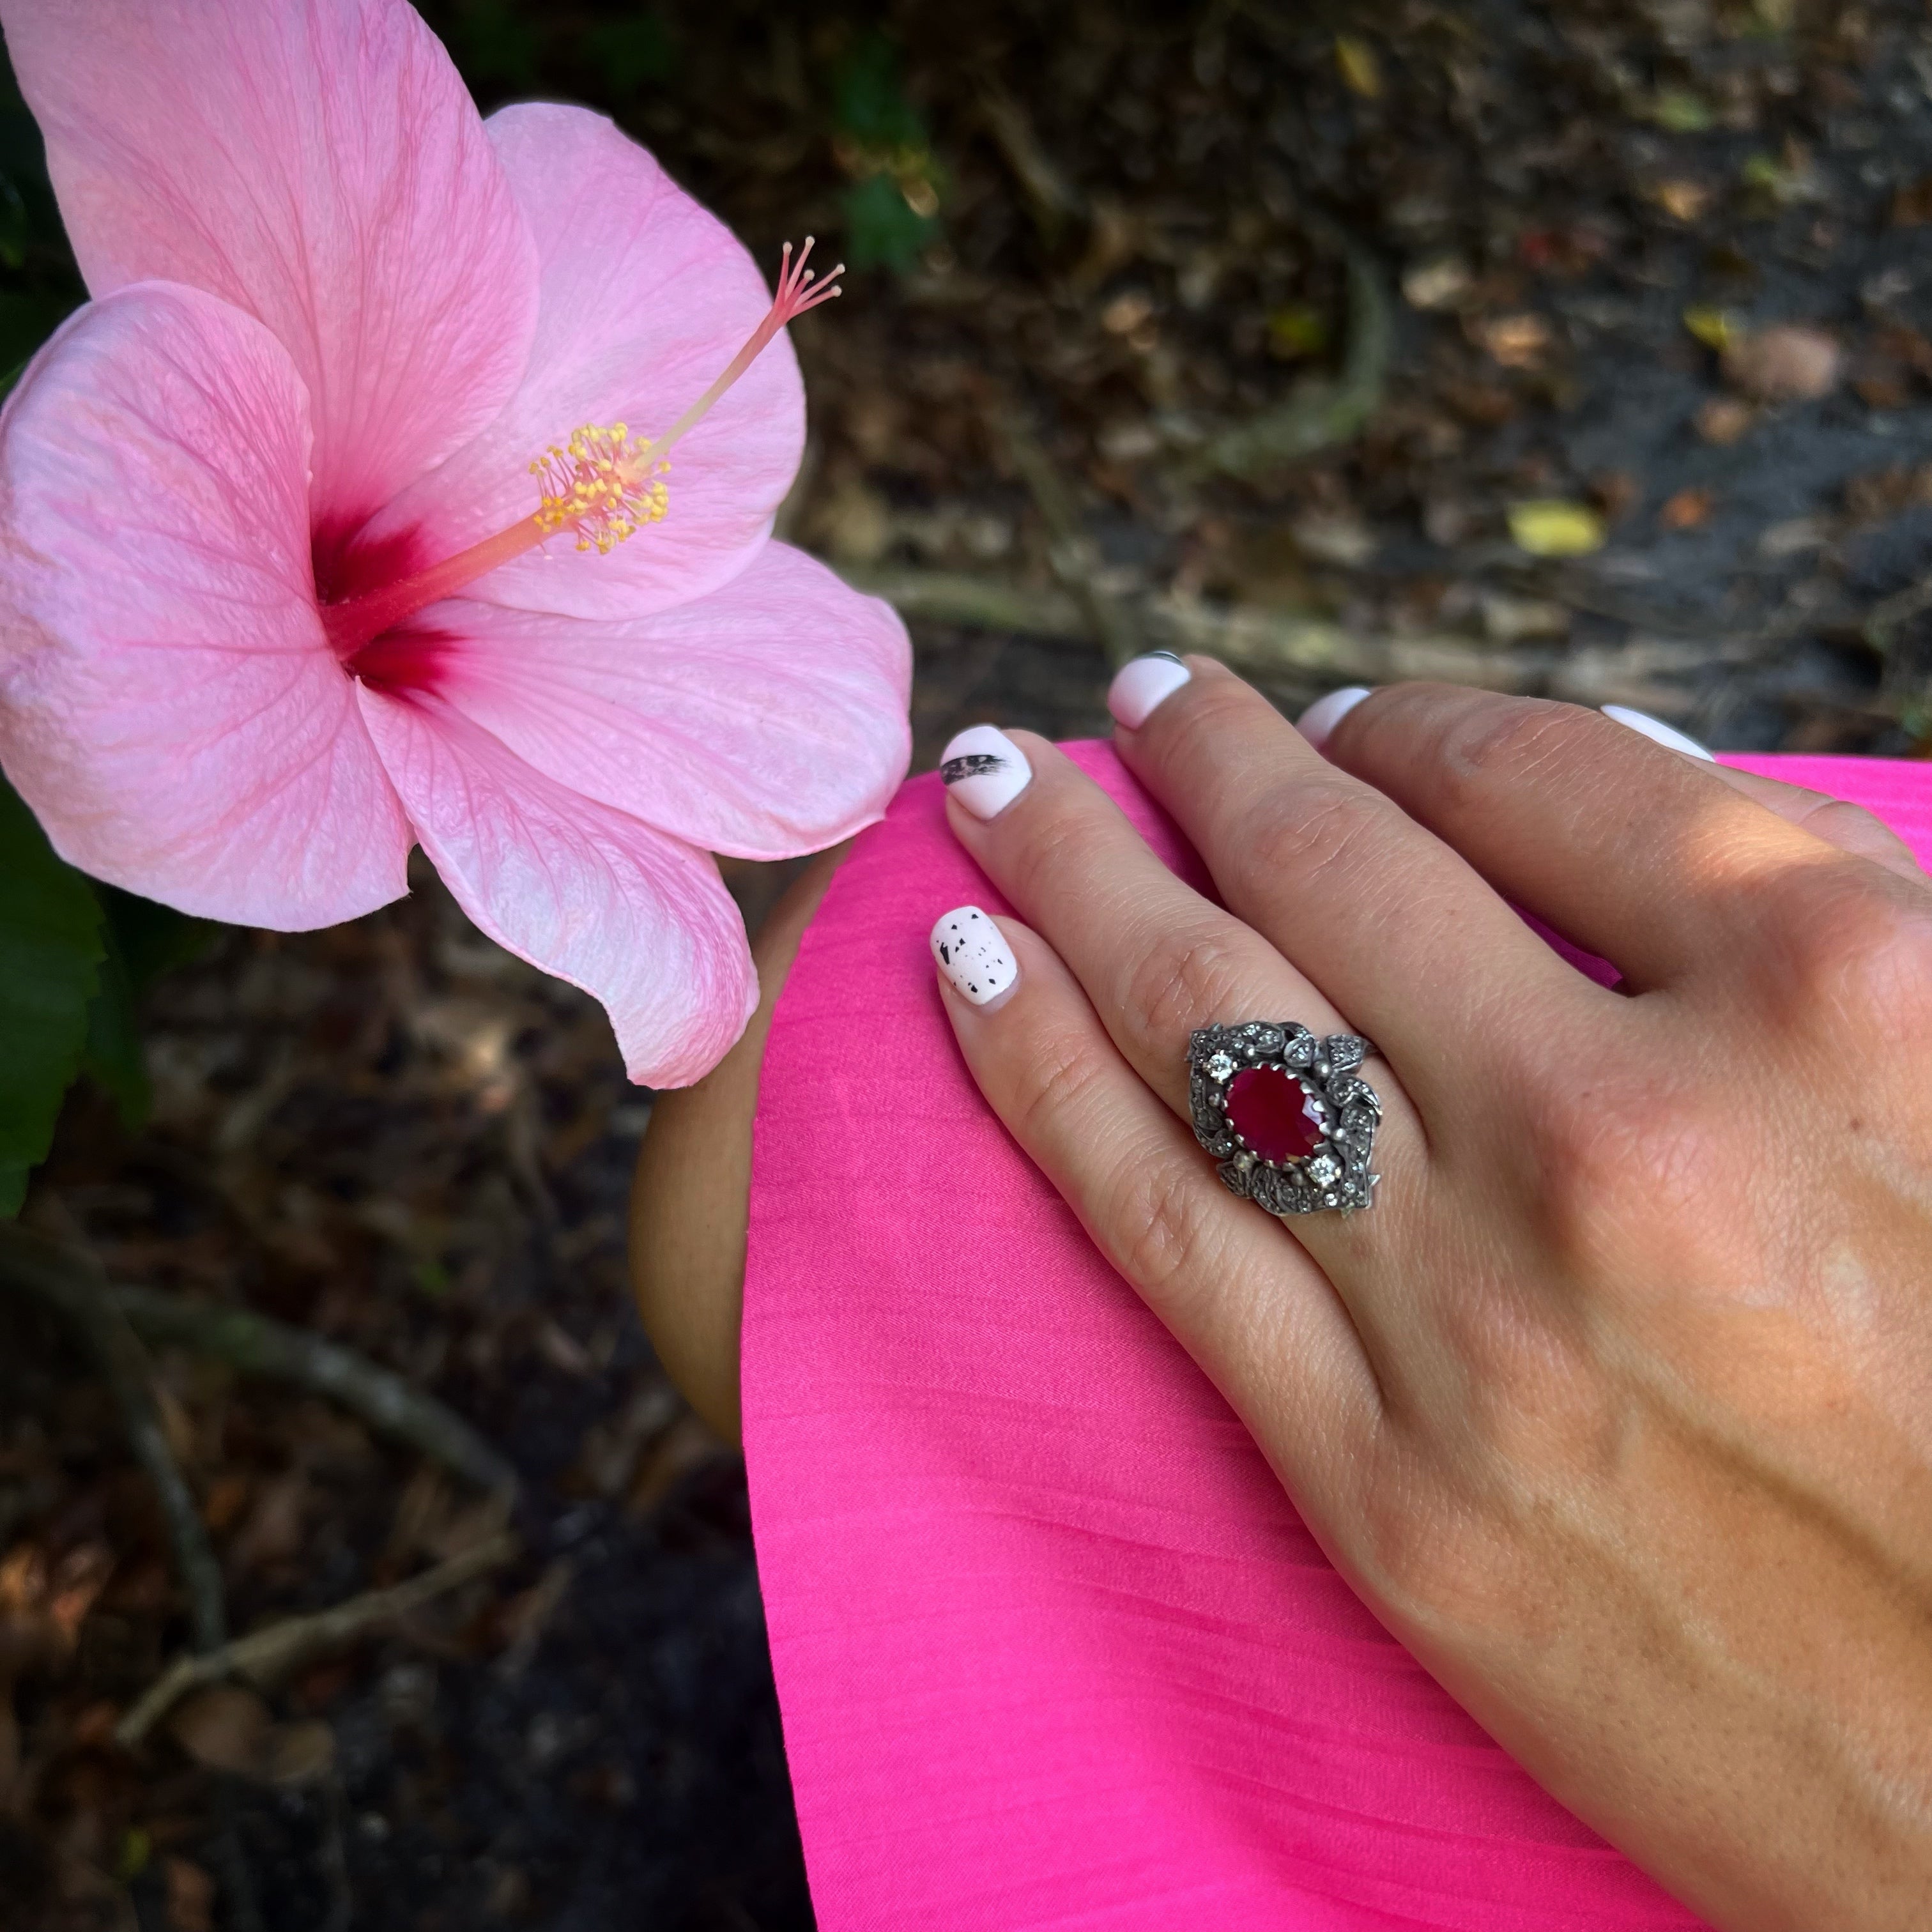 Perfect for Daily Wear - The model demonstrates how this luxurious ring can be worn daily for a touch of glamour.